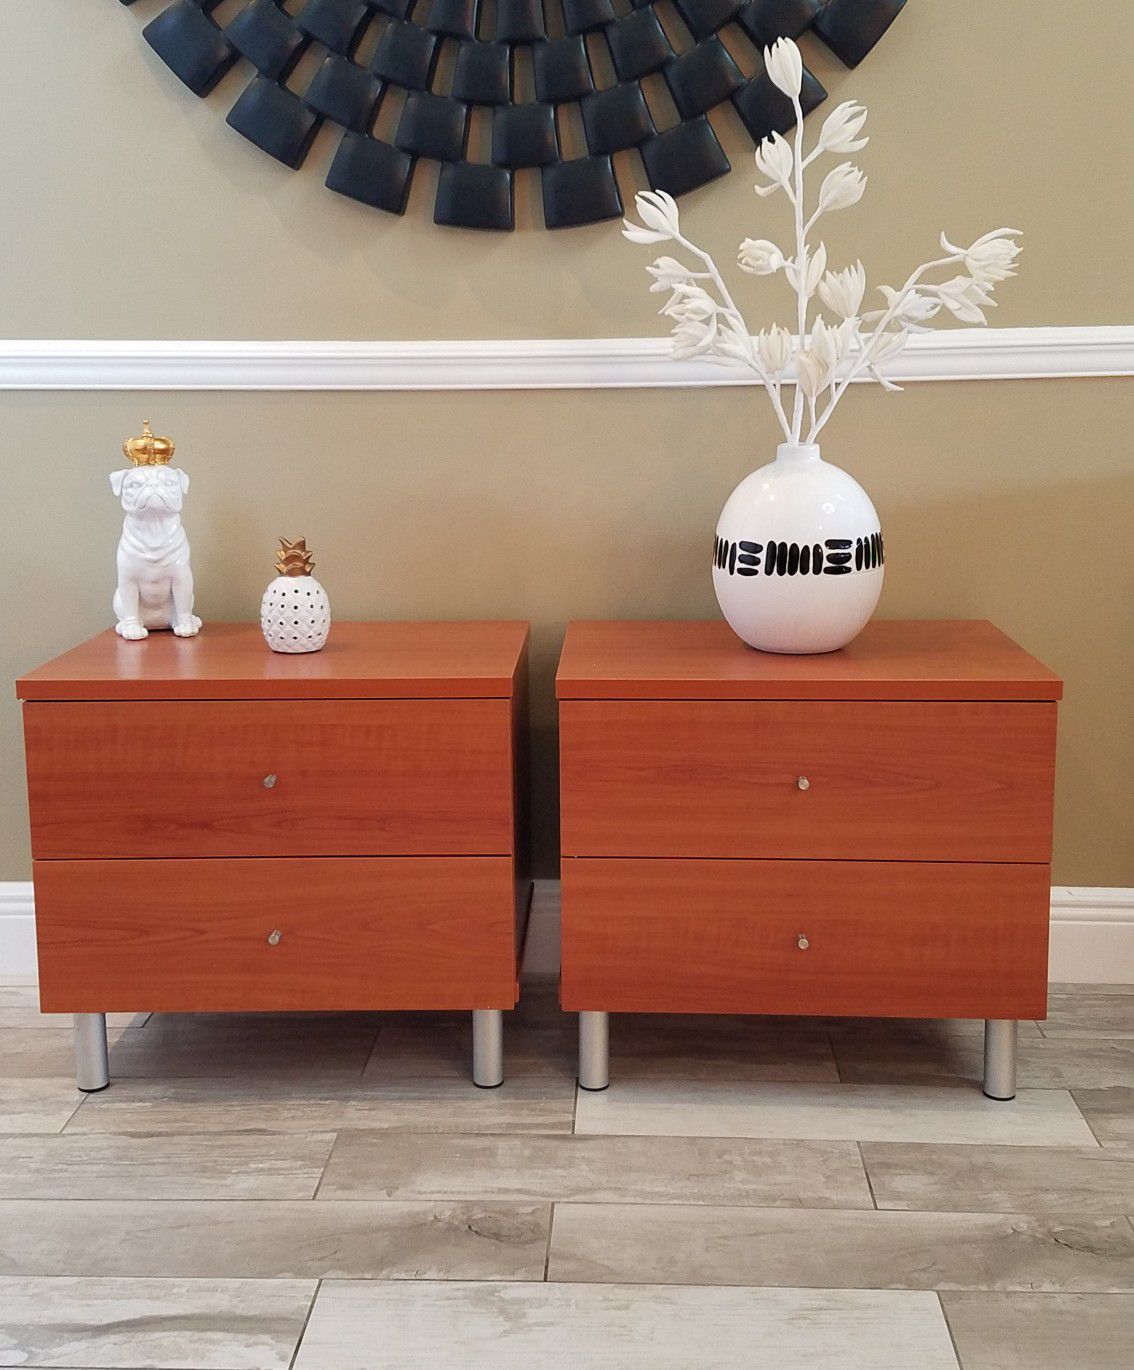 Brand new modern cherry wood two drawer nightstands / end tables with silver tubes legs H=21" d=16" w=22.75"